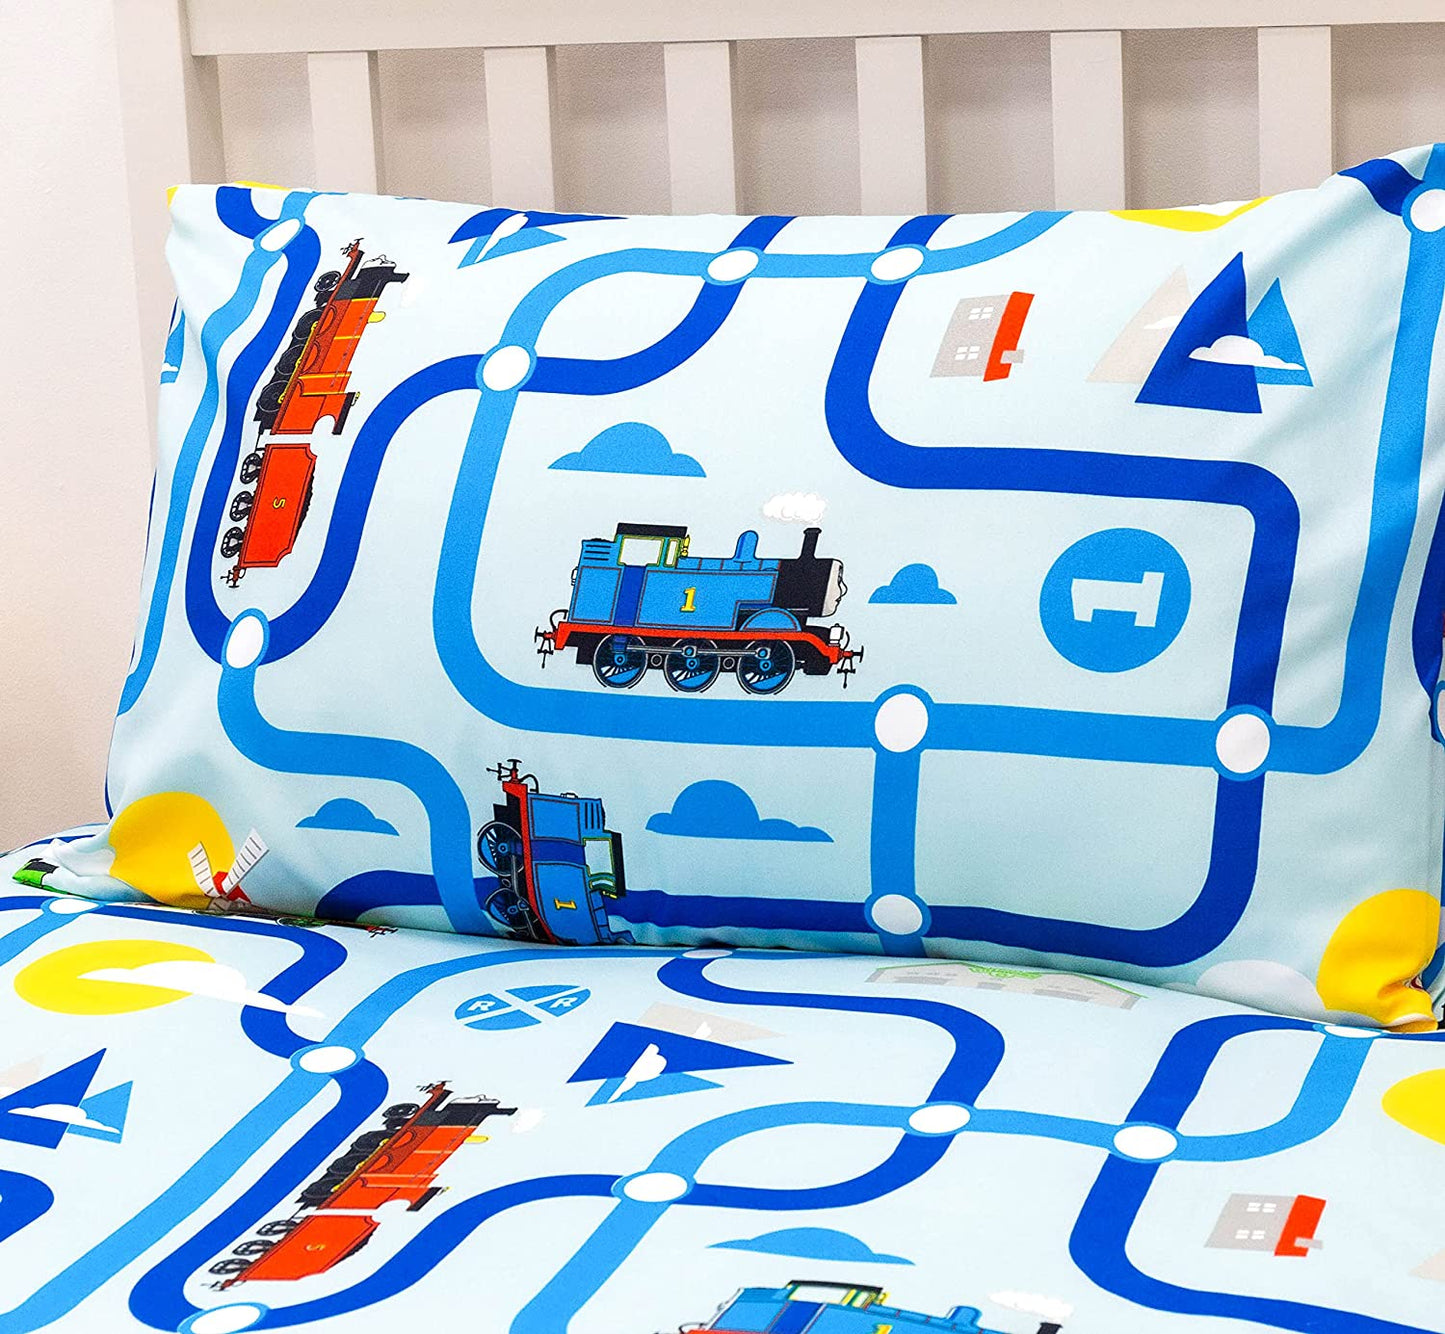 Single Bed Thomas The Tank Engine Tracks Duvet Cover Set Character Bedding